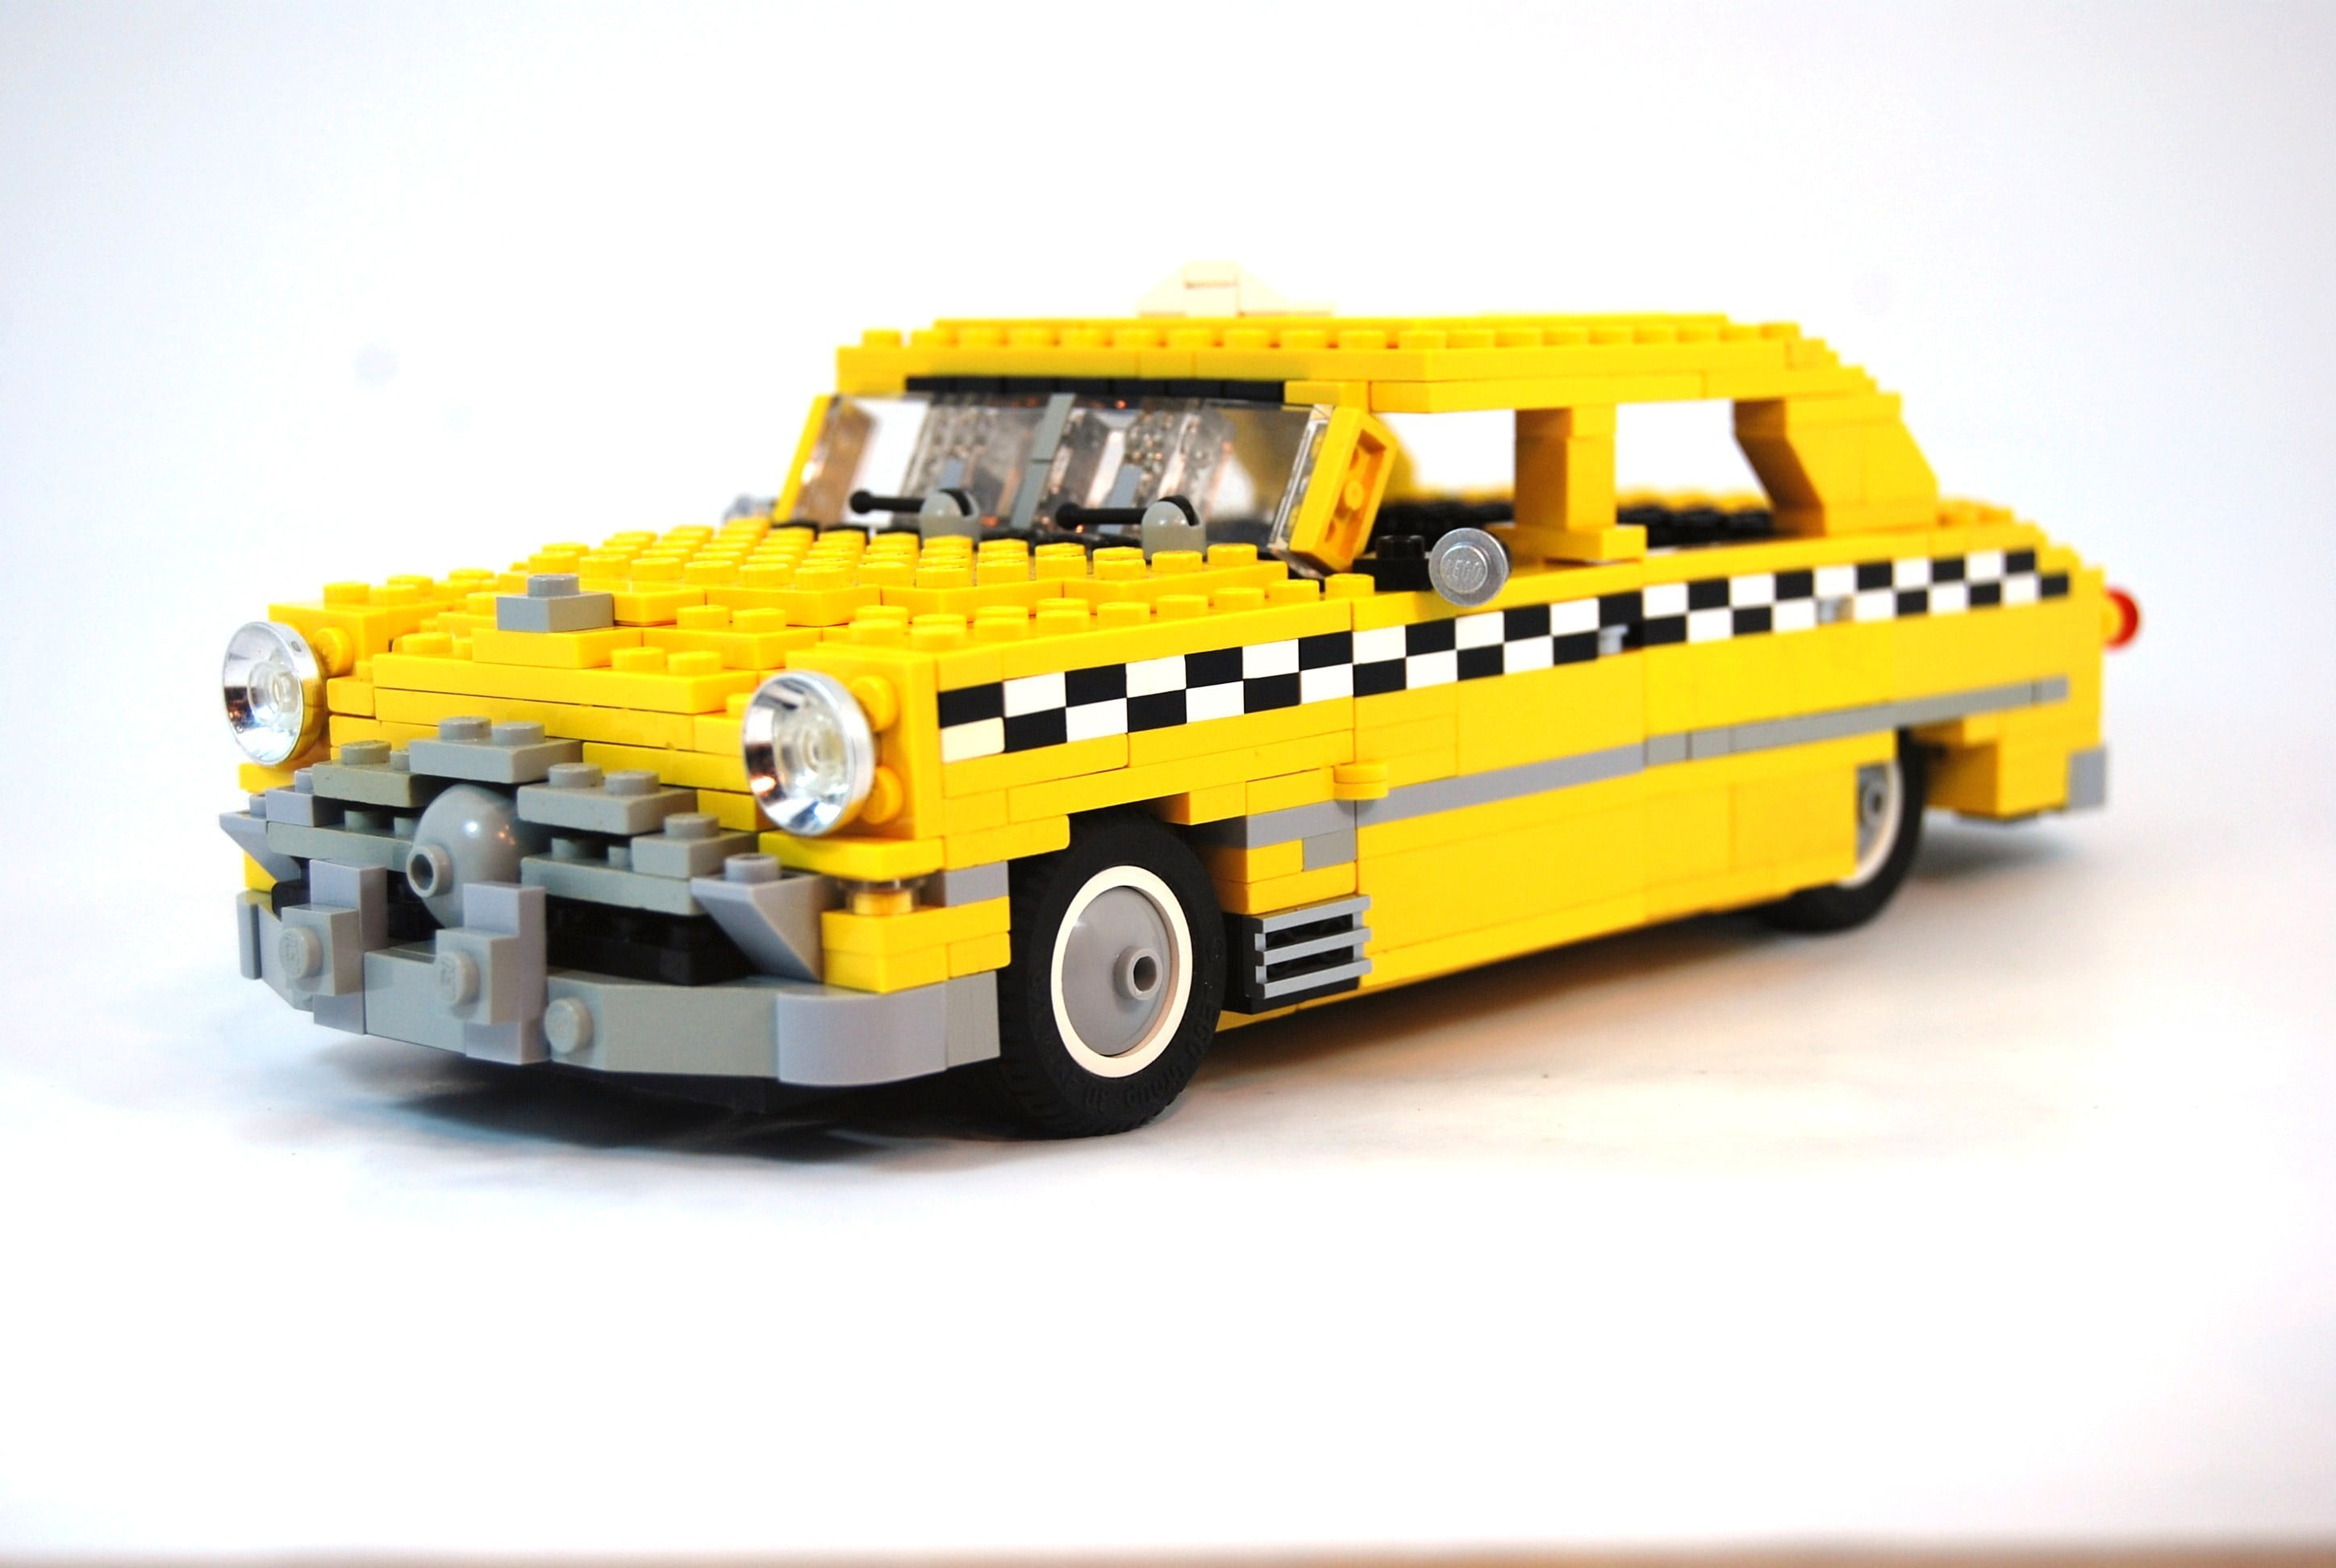 Lego Taxi puzzle toy, car, white background, yellow cars, checkered